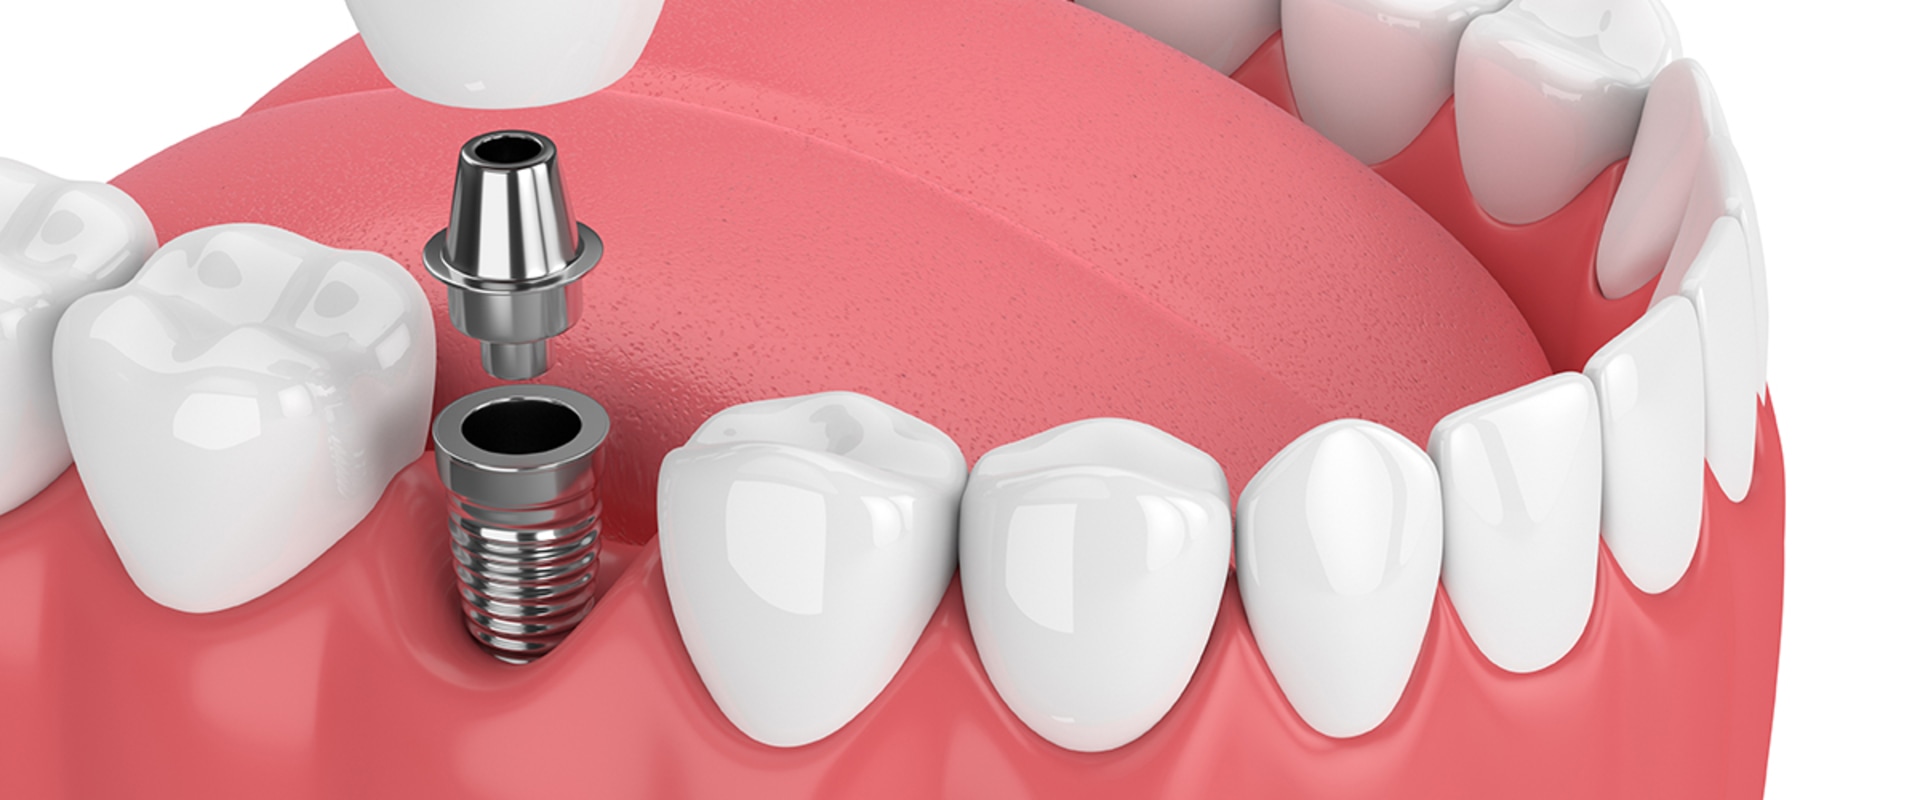 All You Need To Know About Dental Veneers And Dental Implants In Allen, TX